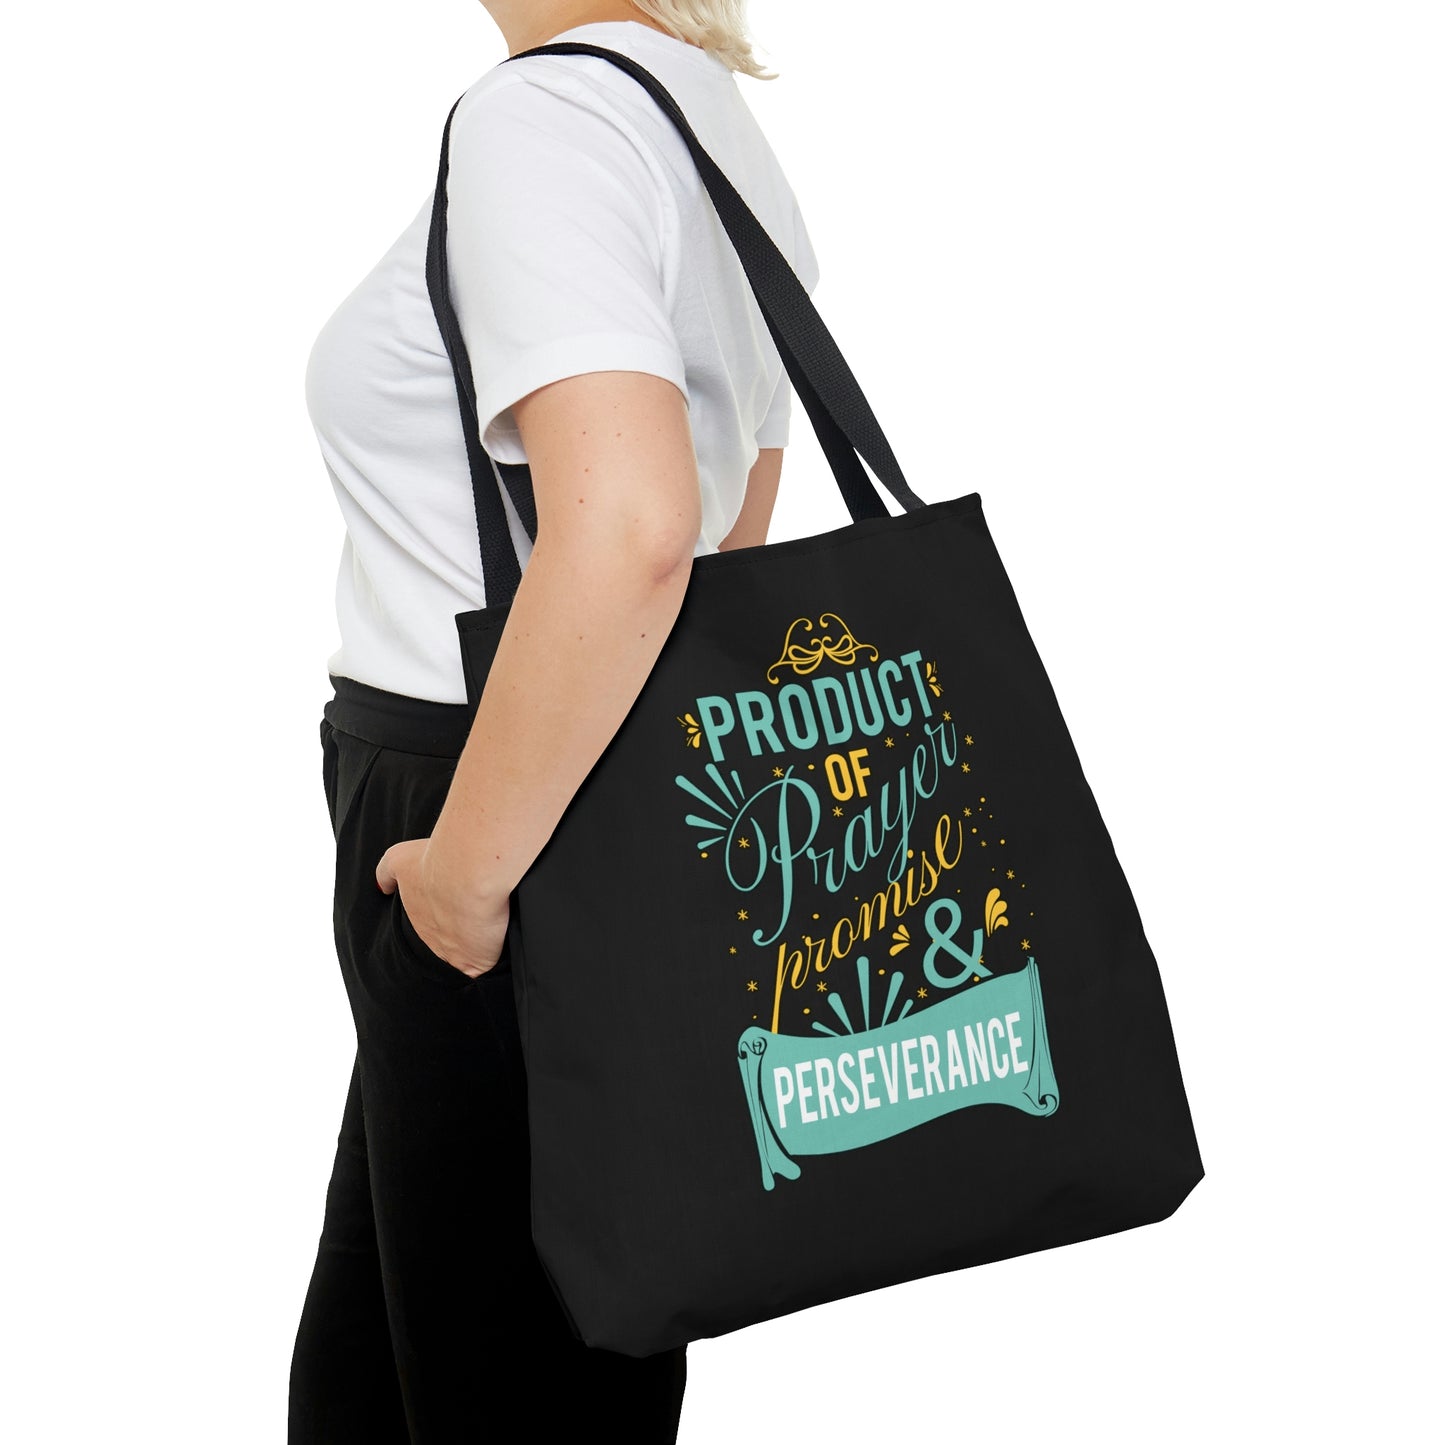 Product of prayer, promise, and perseverance Tote Bag